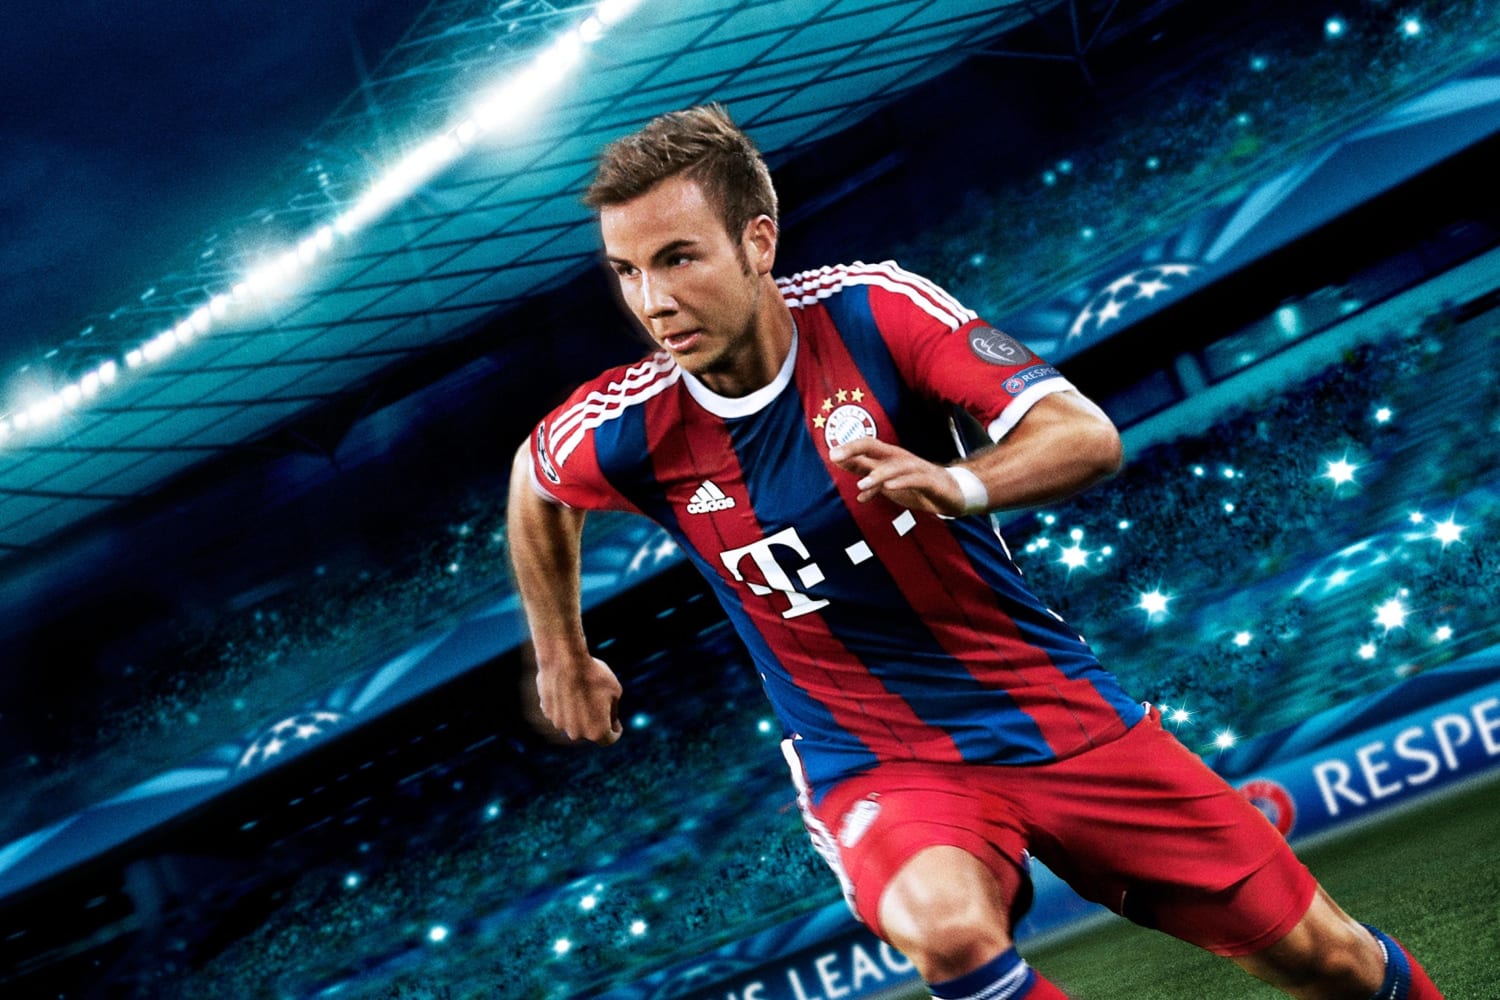 PES 2011 Cuts Price on April 1 on the PC, Xbox 360 and PS3